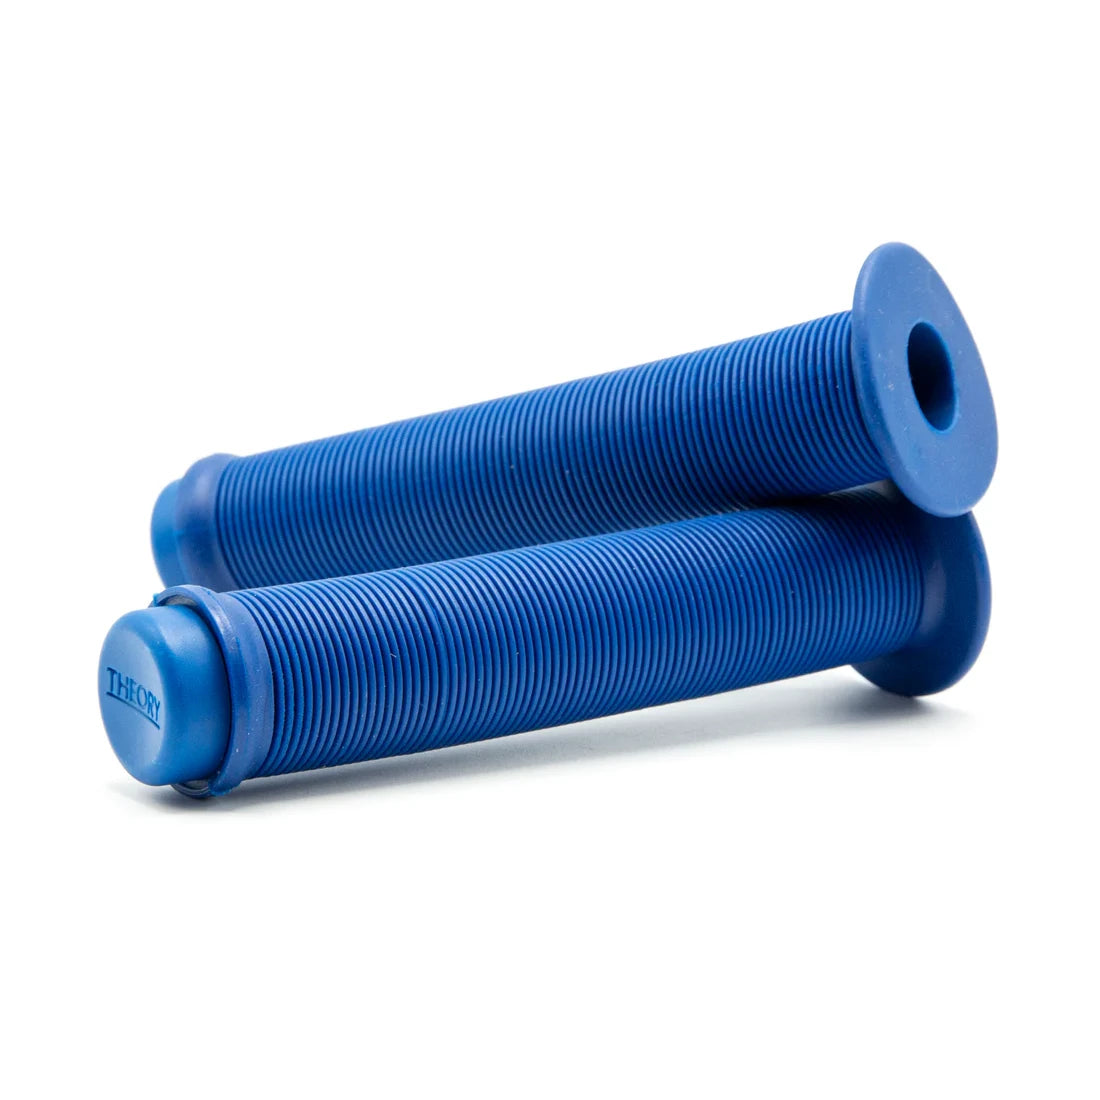 Theory Data Grips w/ Bar Ends - Flanged - Blue